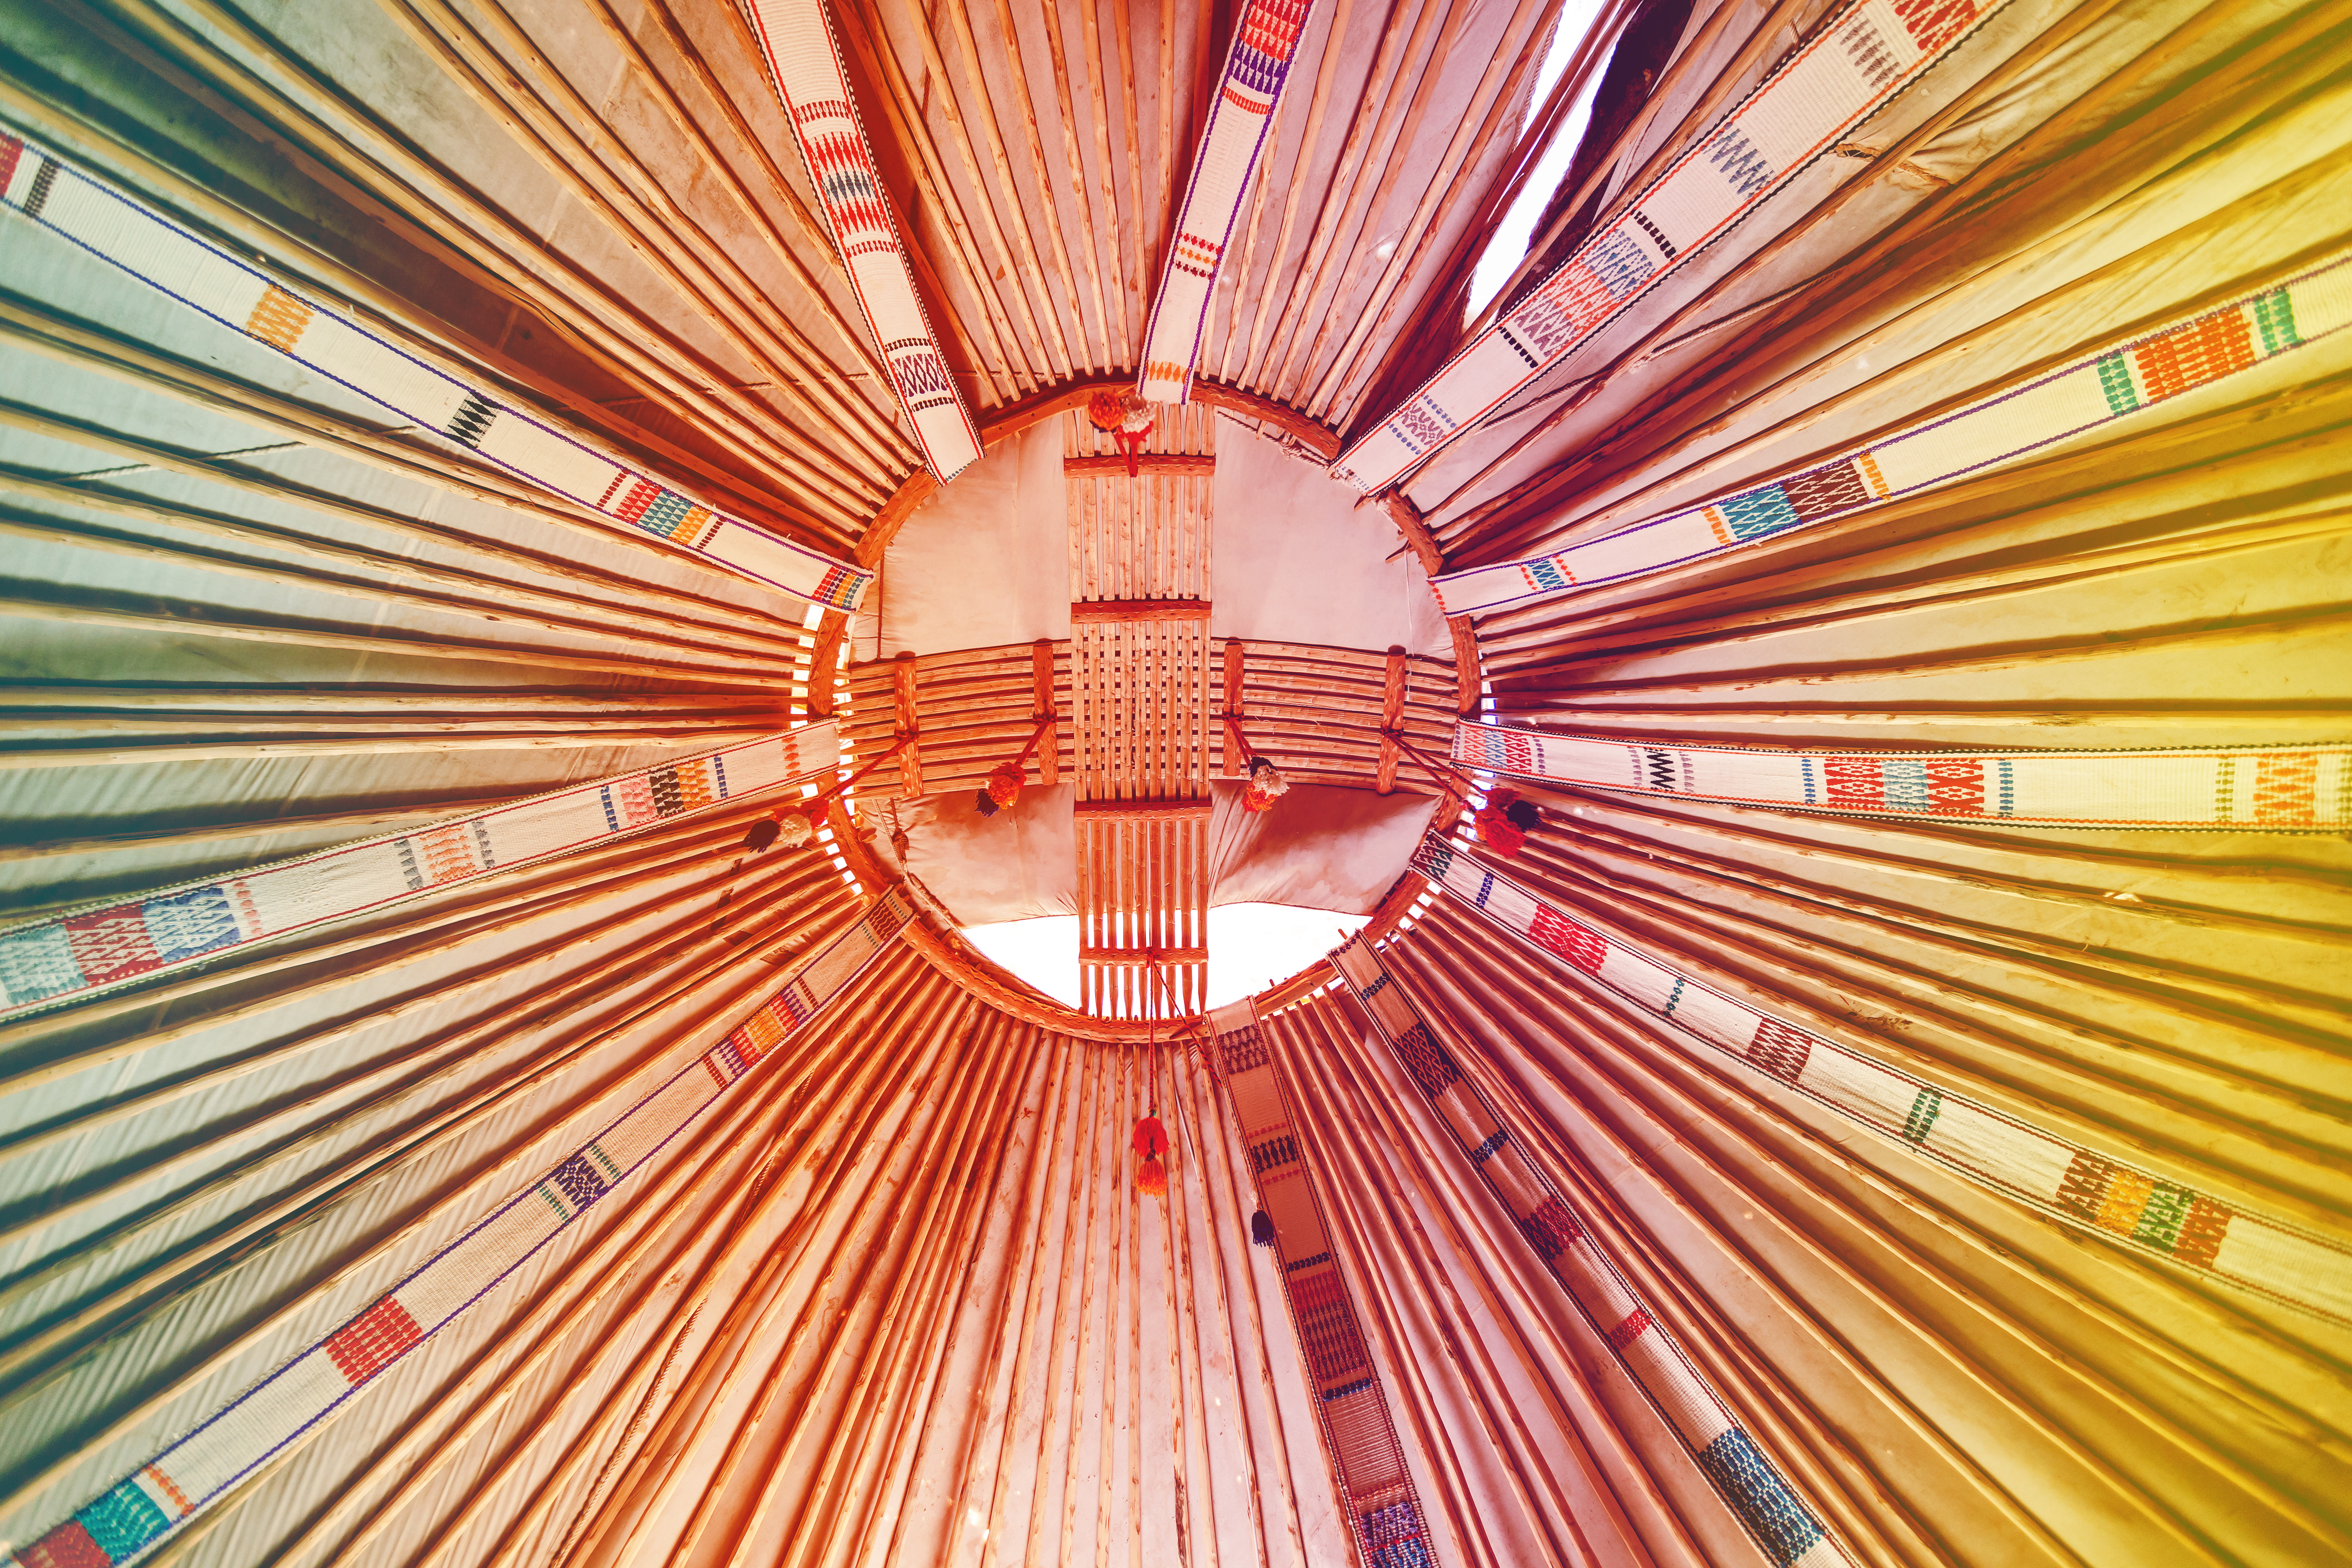 The structurally intricate roof of a yurt © Photosite / Shutterstock